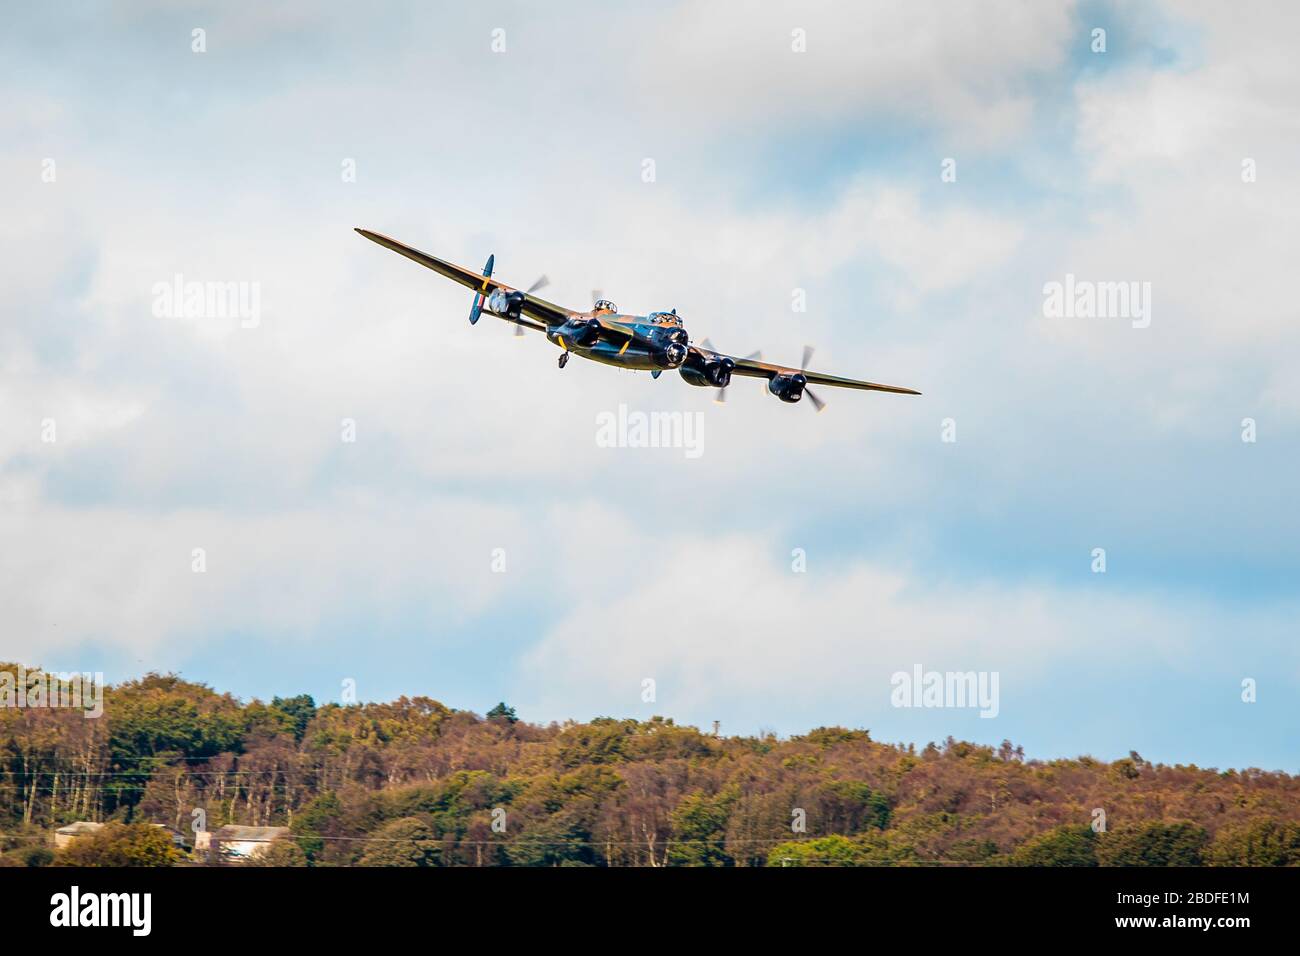 Lancaster Bomber banking low pass over fields and trees whilst taking part in celebrations for Leeds Bradford Airport's 90th birthday on 20.10.2011 Stock Photo